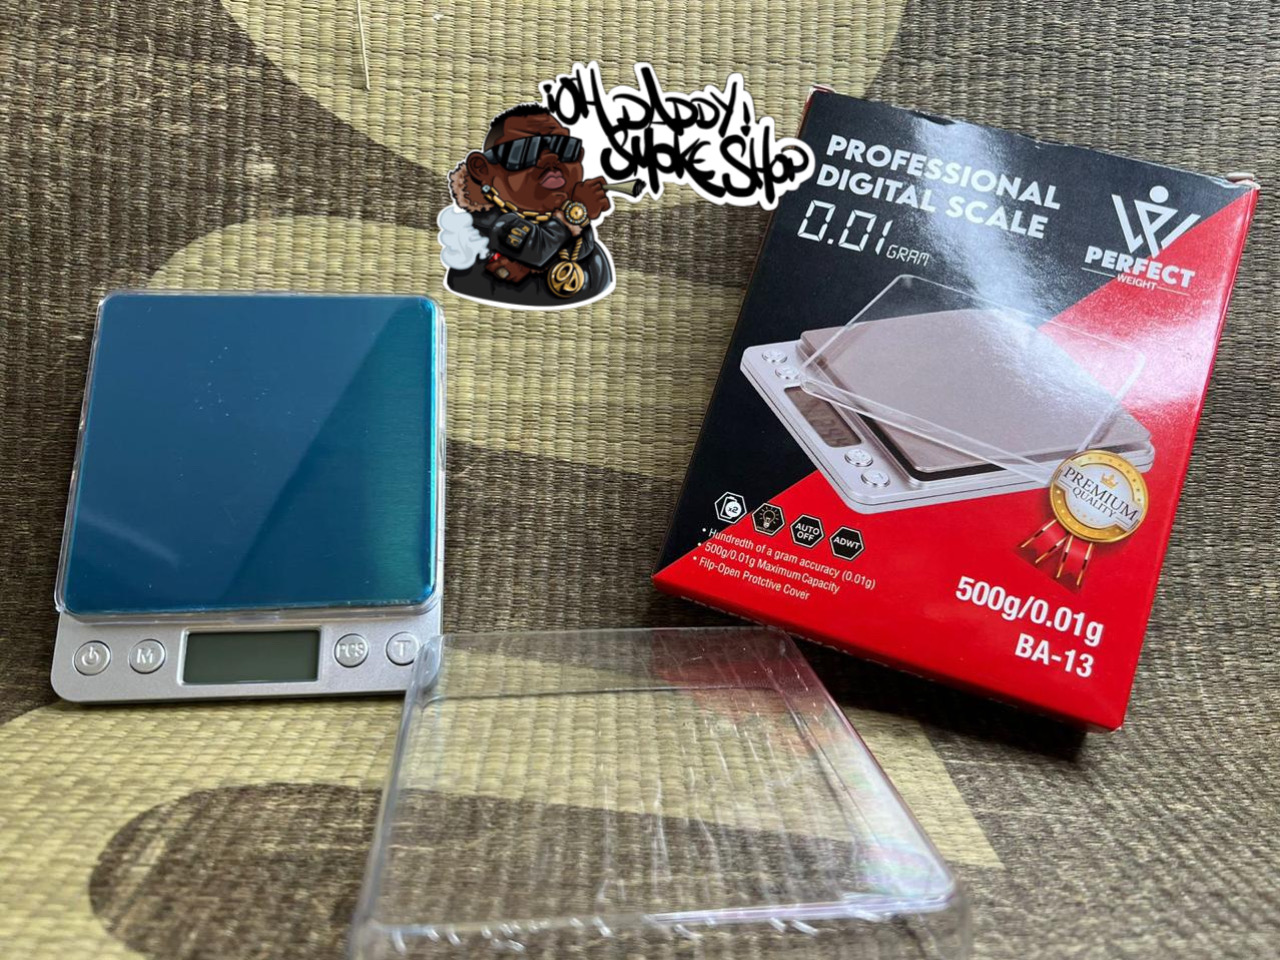 Profesional Digital Scale Perfect 500g